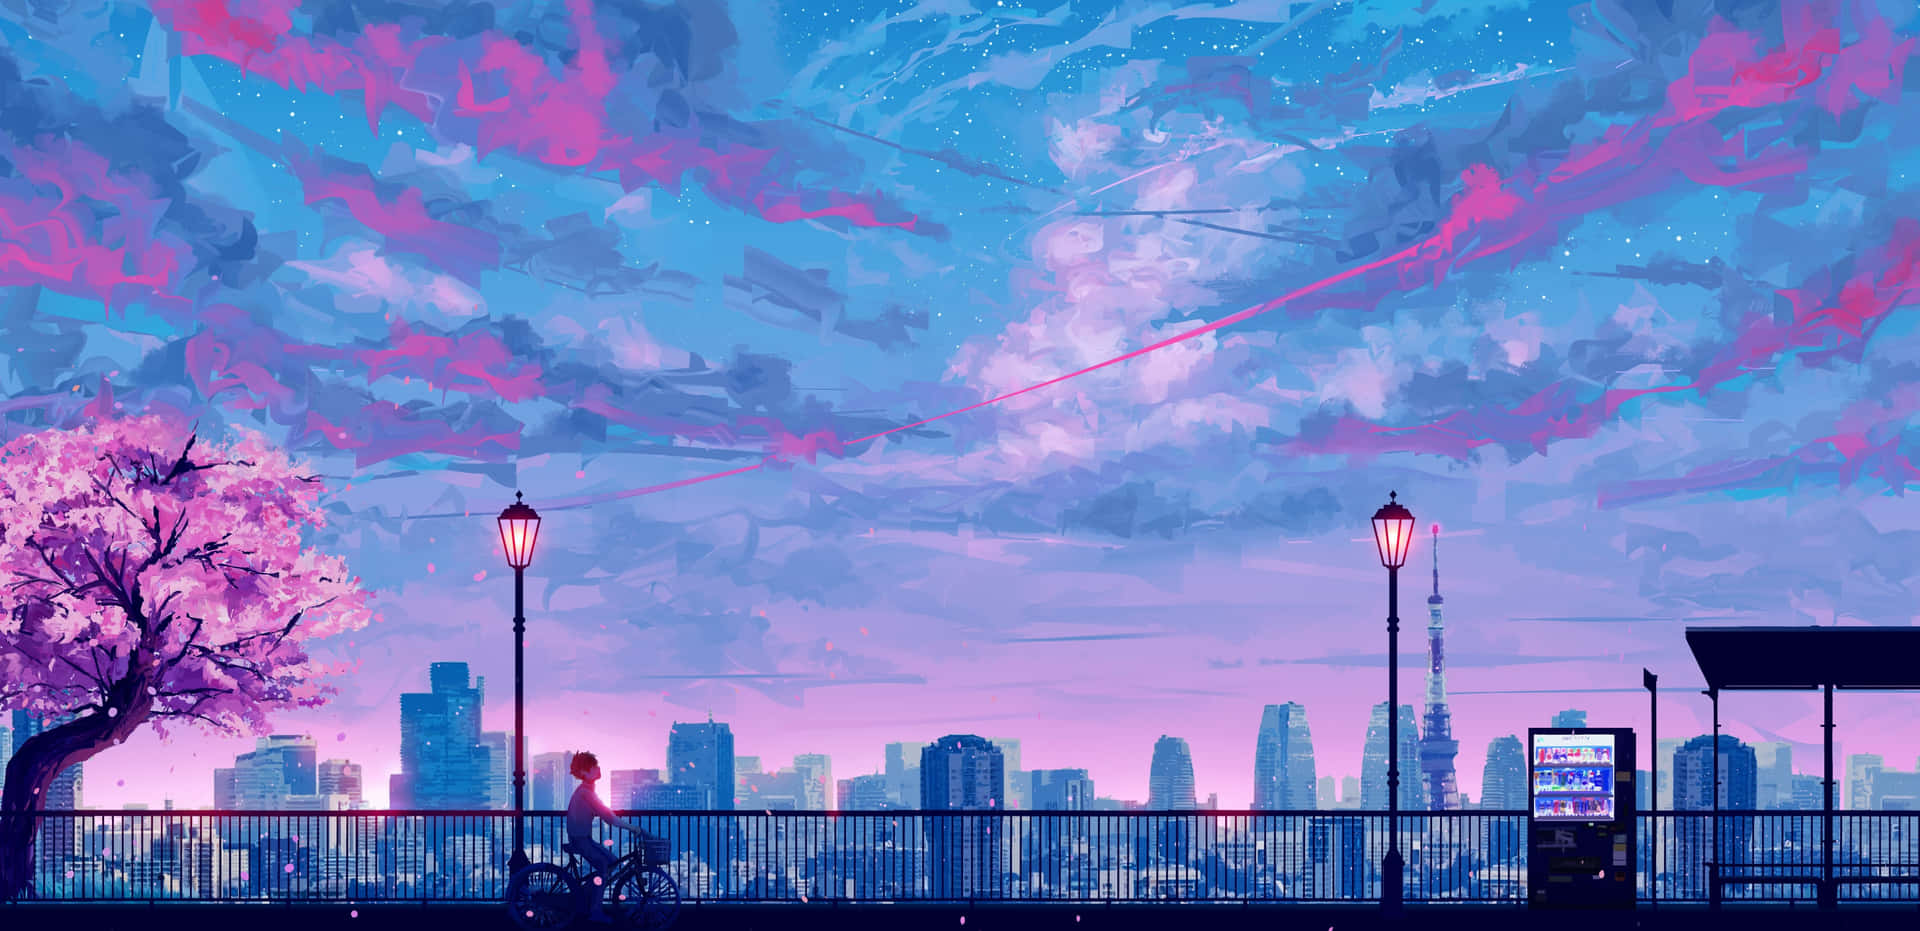 Explore an abstract and surreal pixel landscape Wallpaper